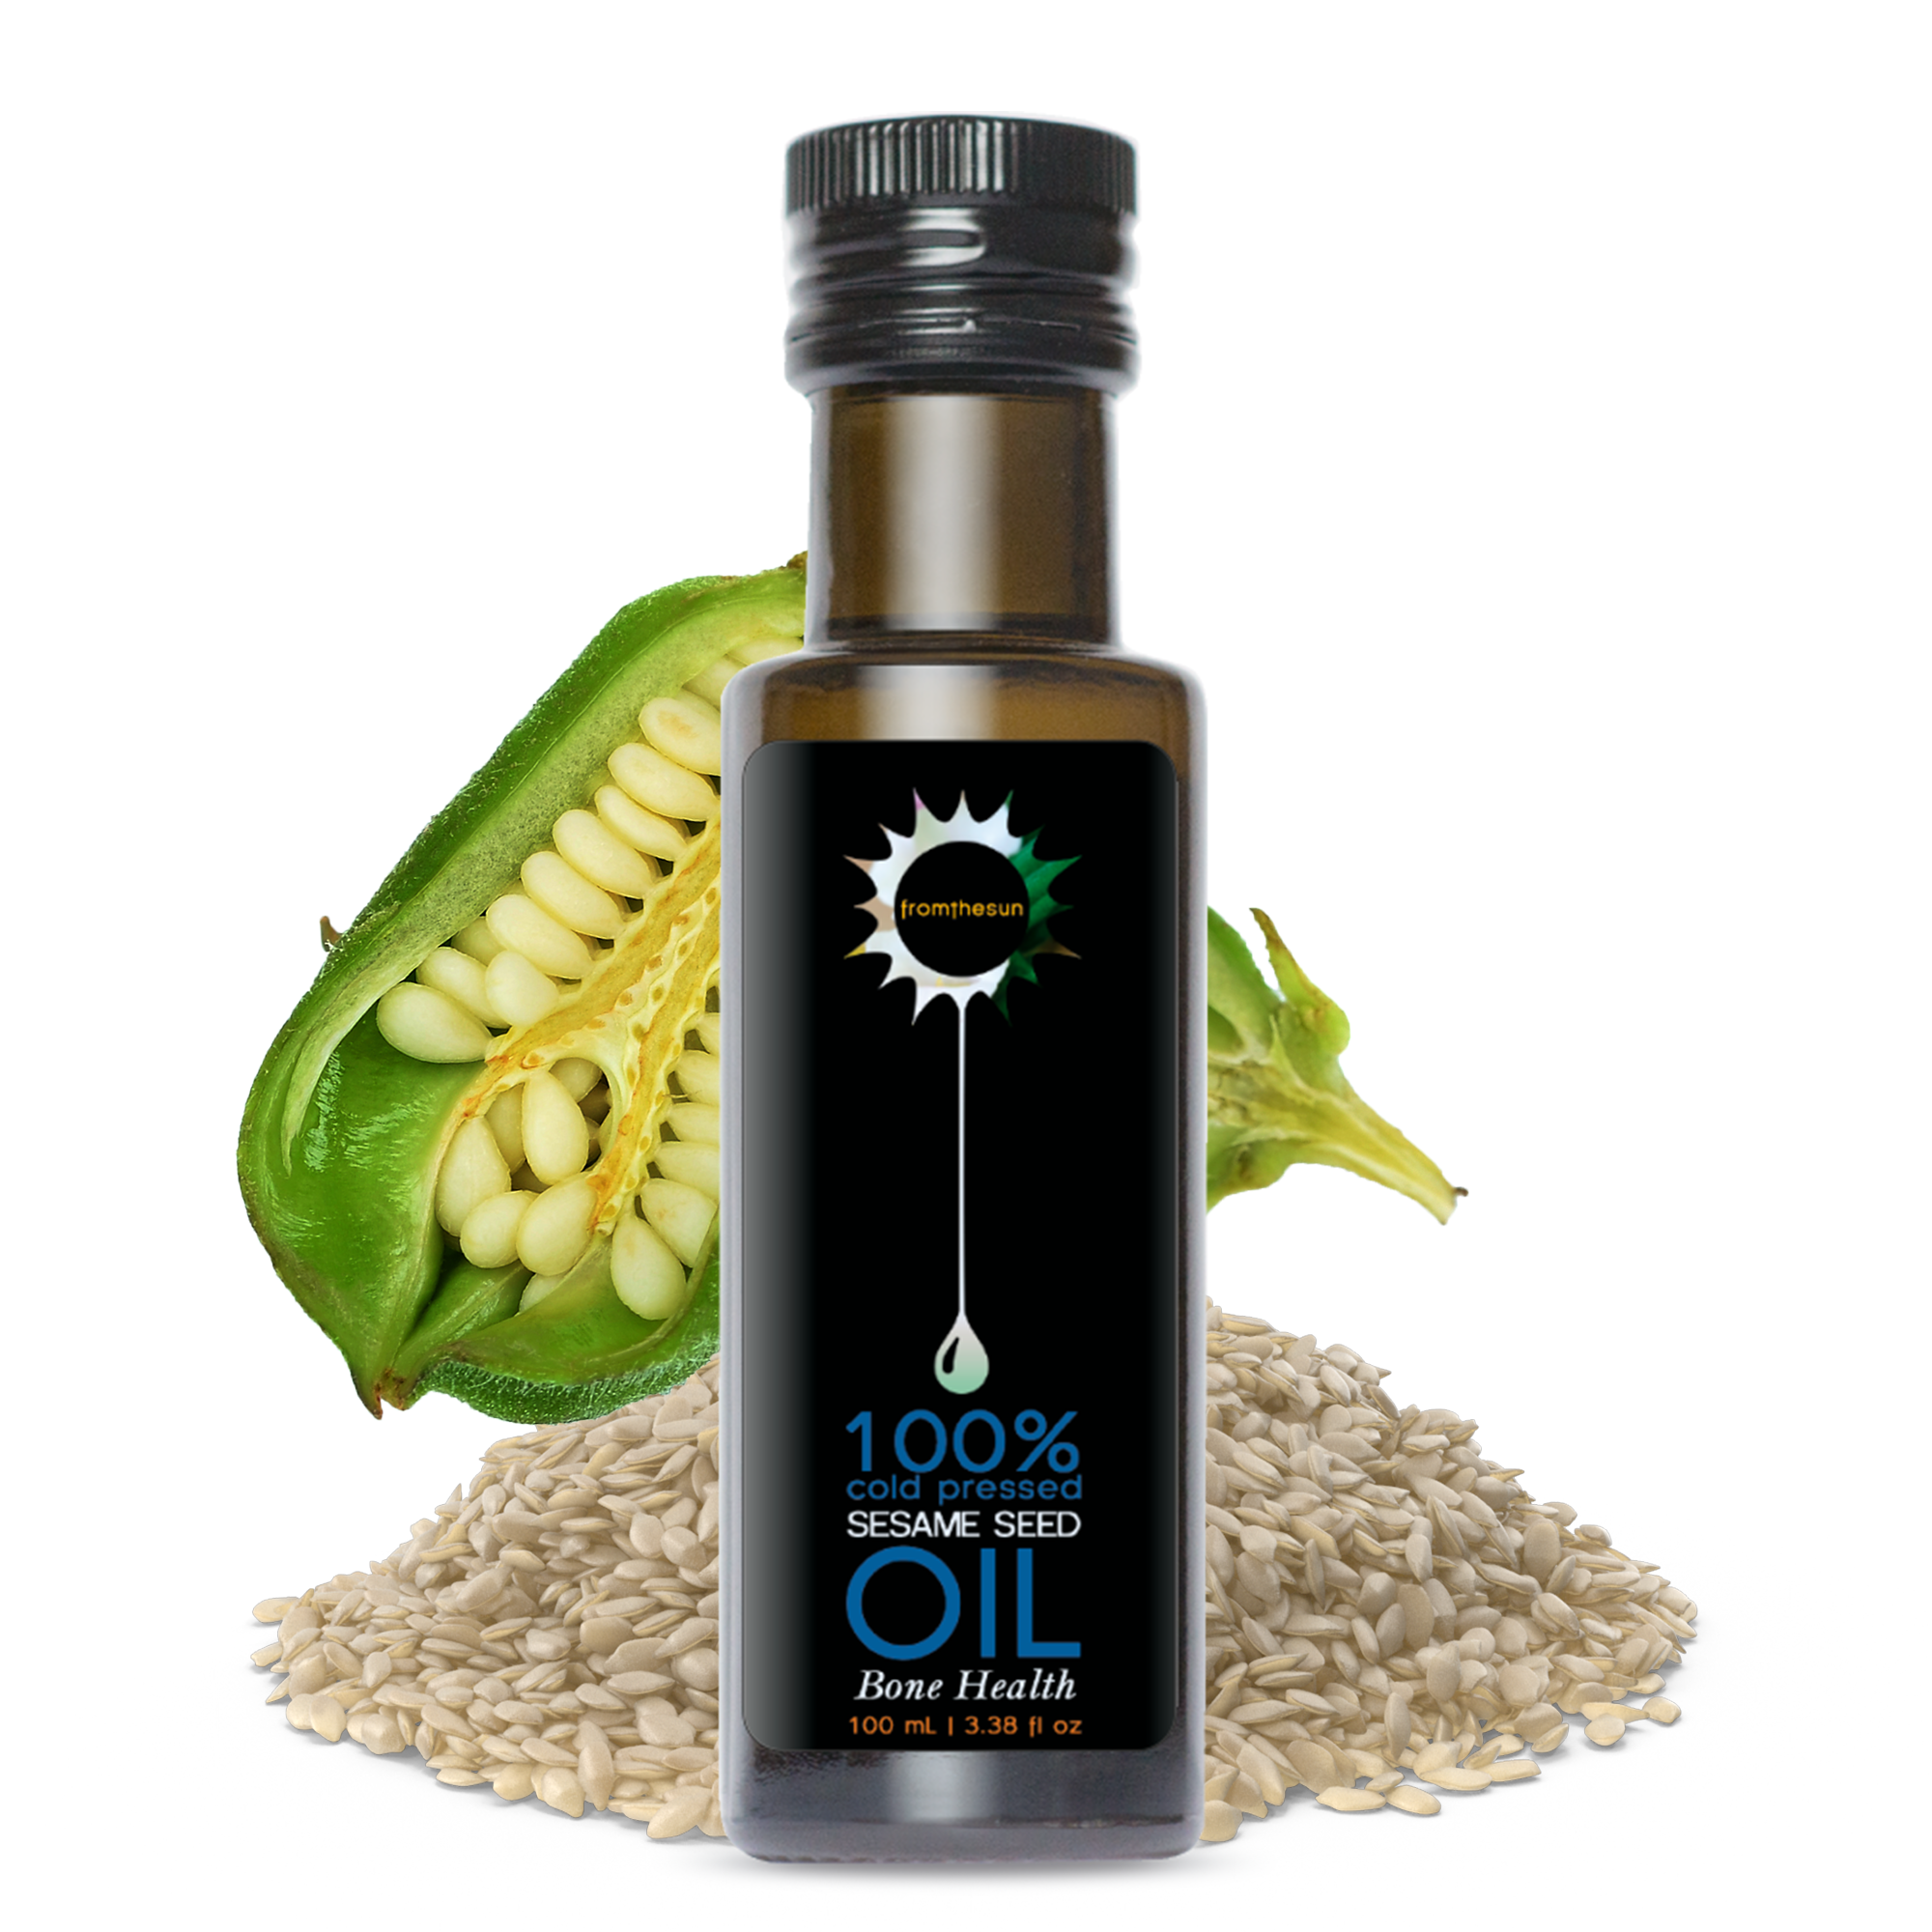 Sesame Oil Cold pressed sesame seeds 100% natural product, 100ml Unrefined